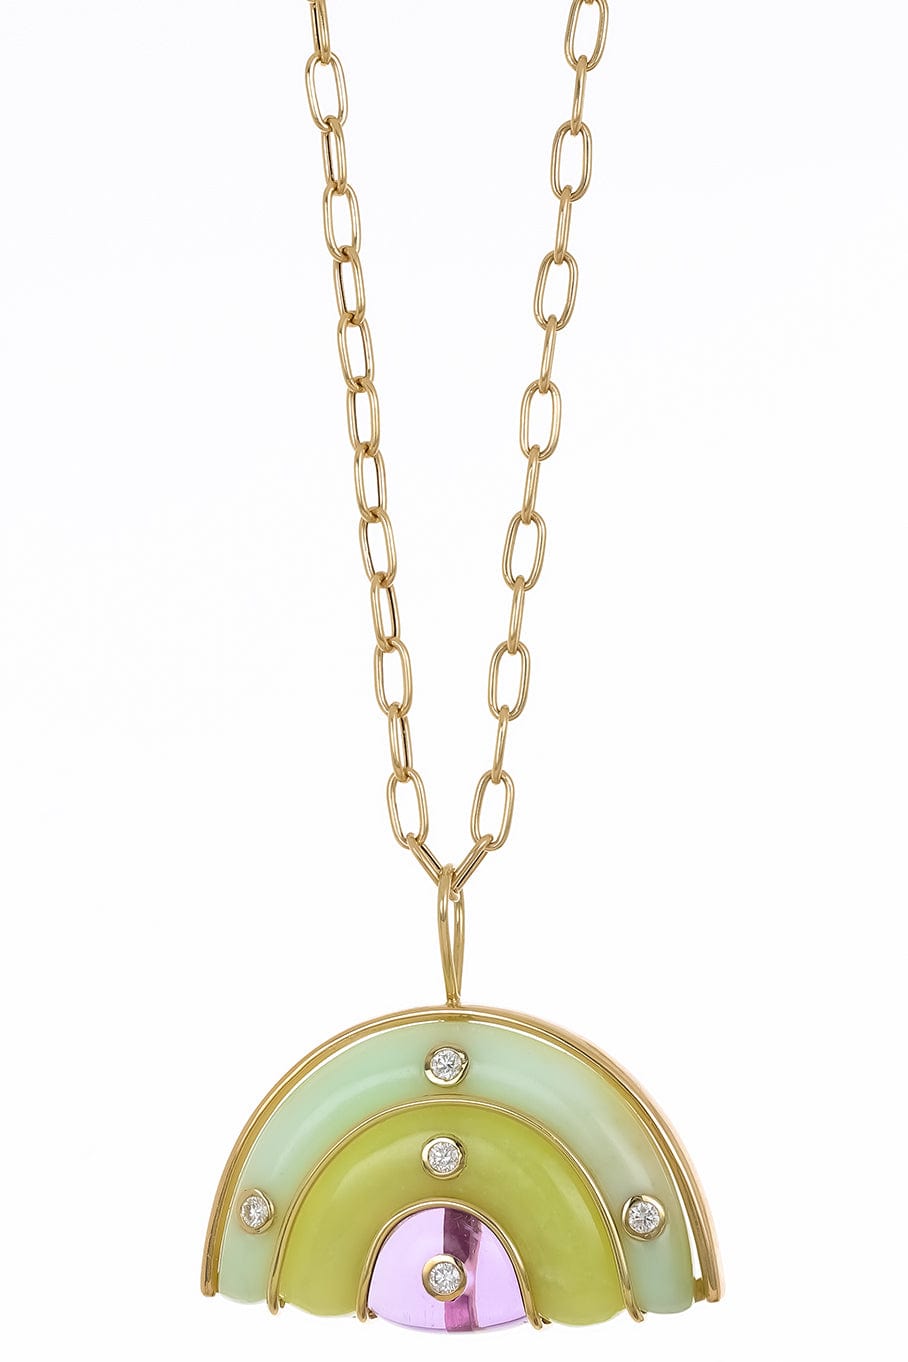 BRENT NEALE-Medium Marianne Opal Necklace-YELLOW GOLD